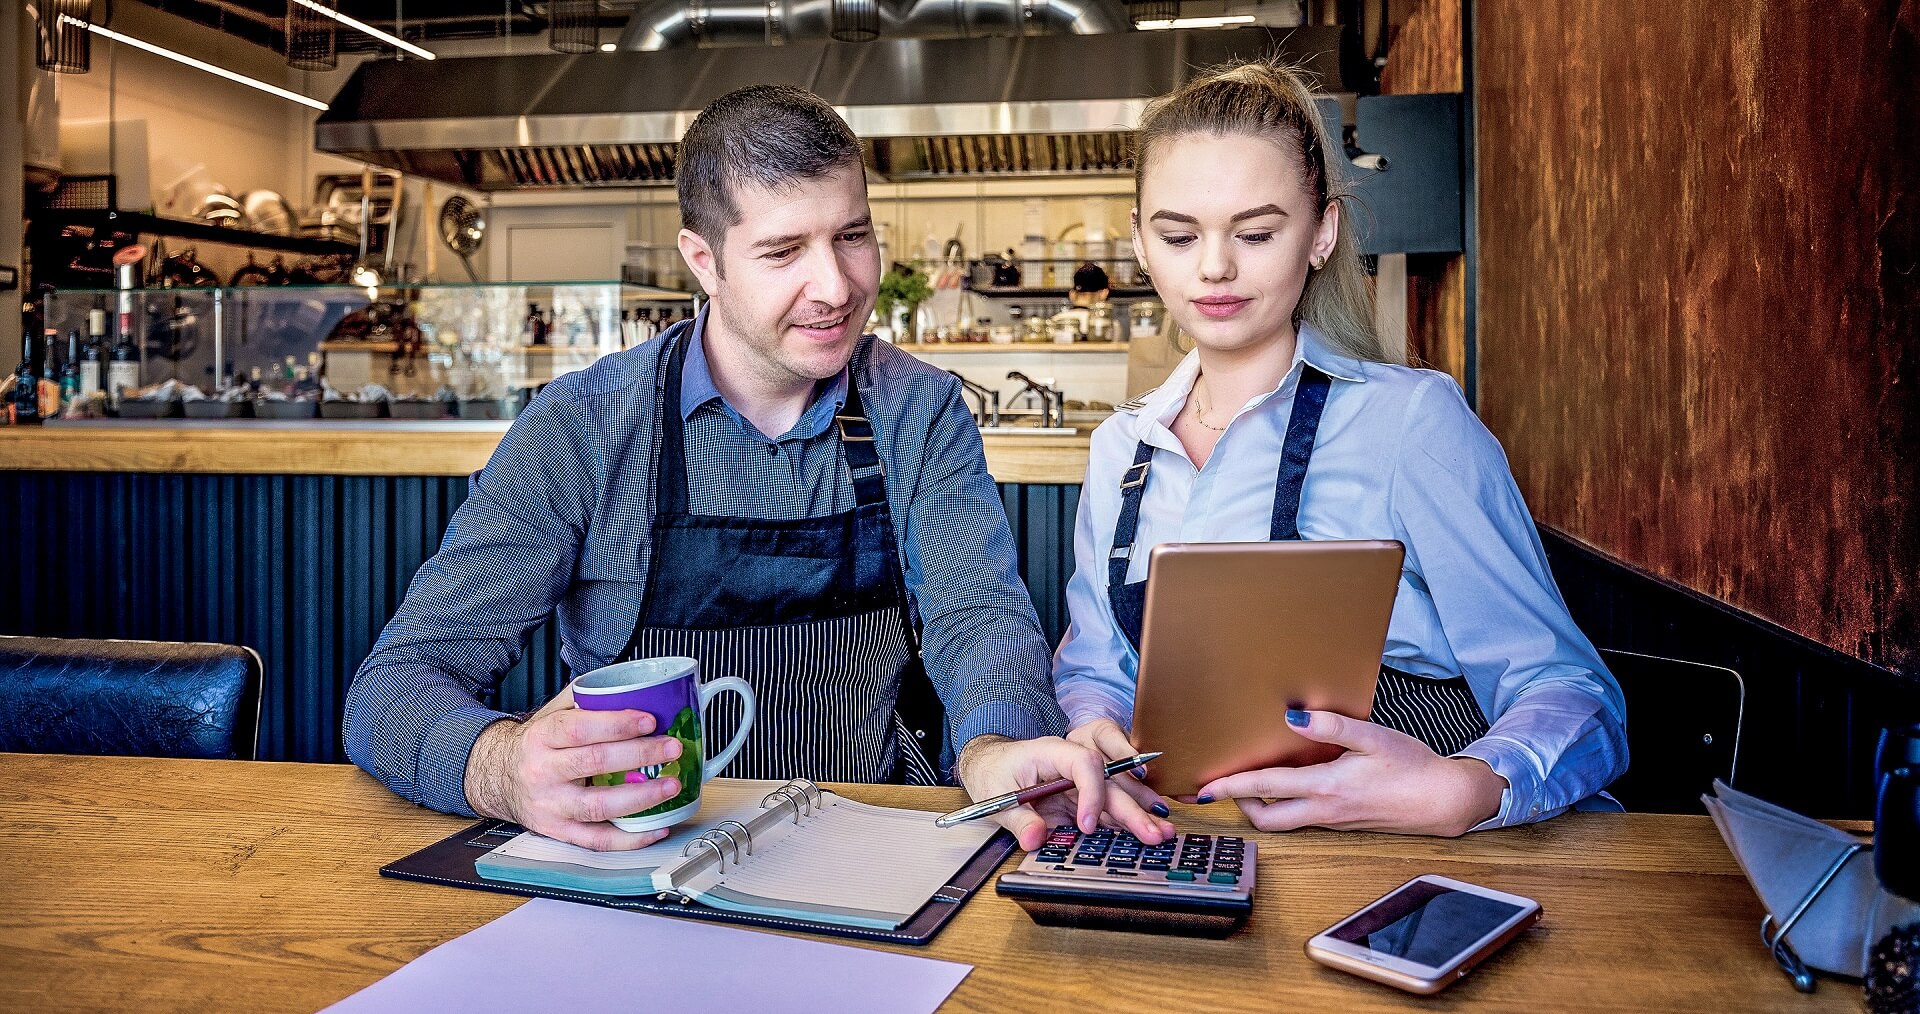 Restaurateurs use their tablets to find solutions to the shortage of skilled workers and rising operating costs.